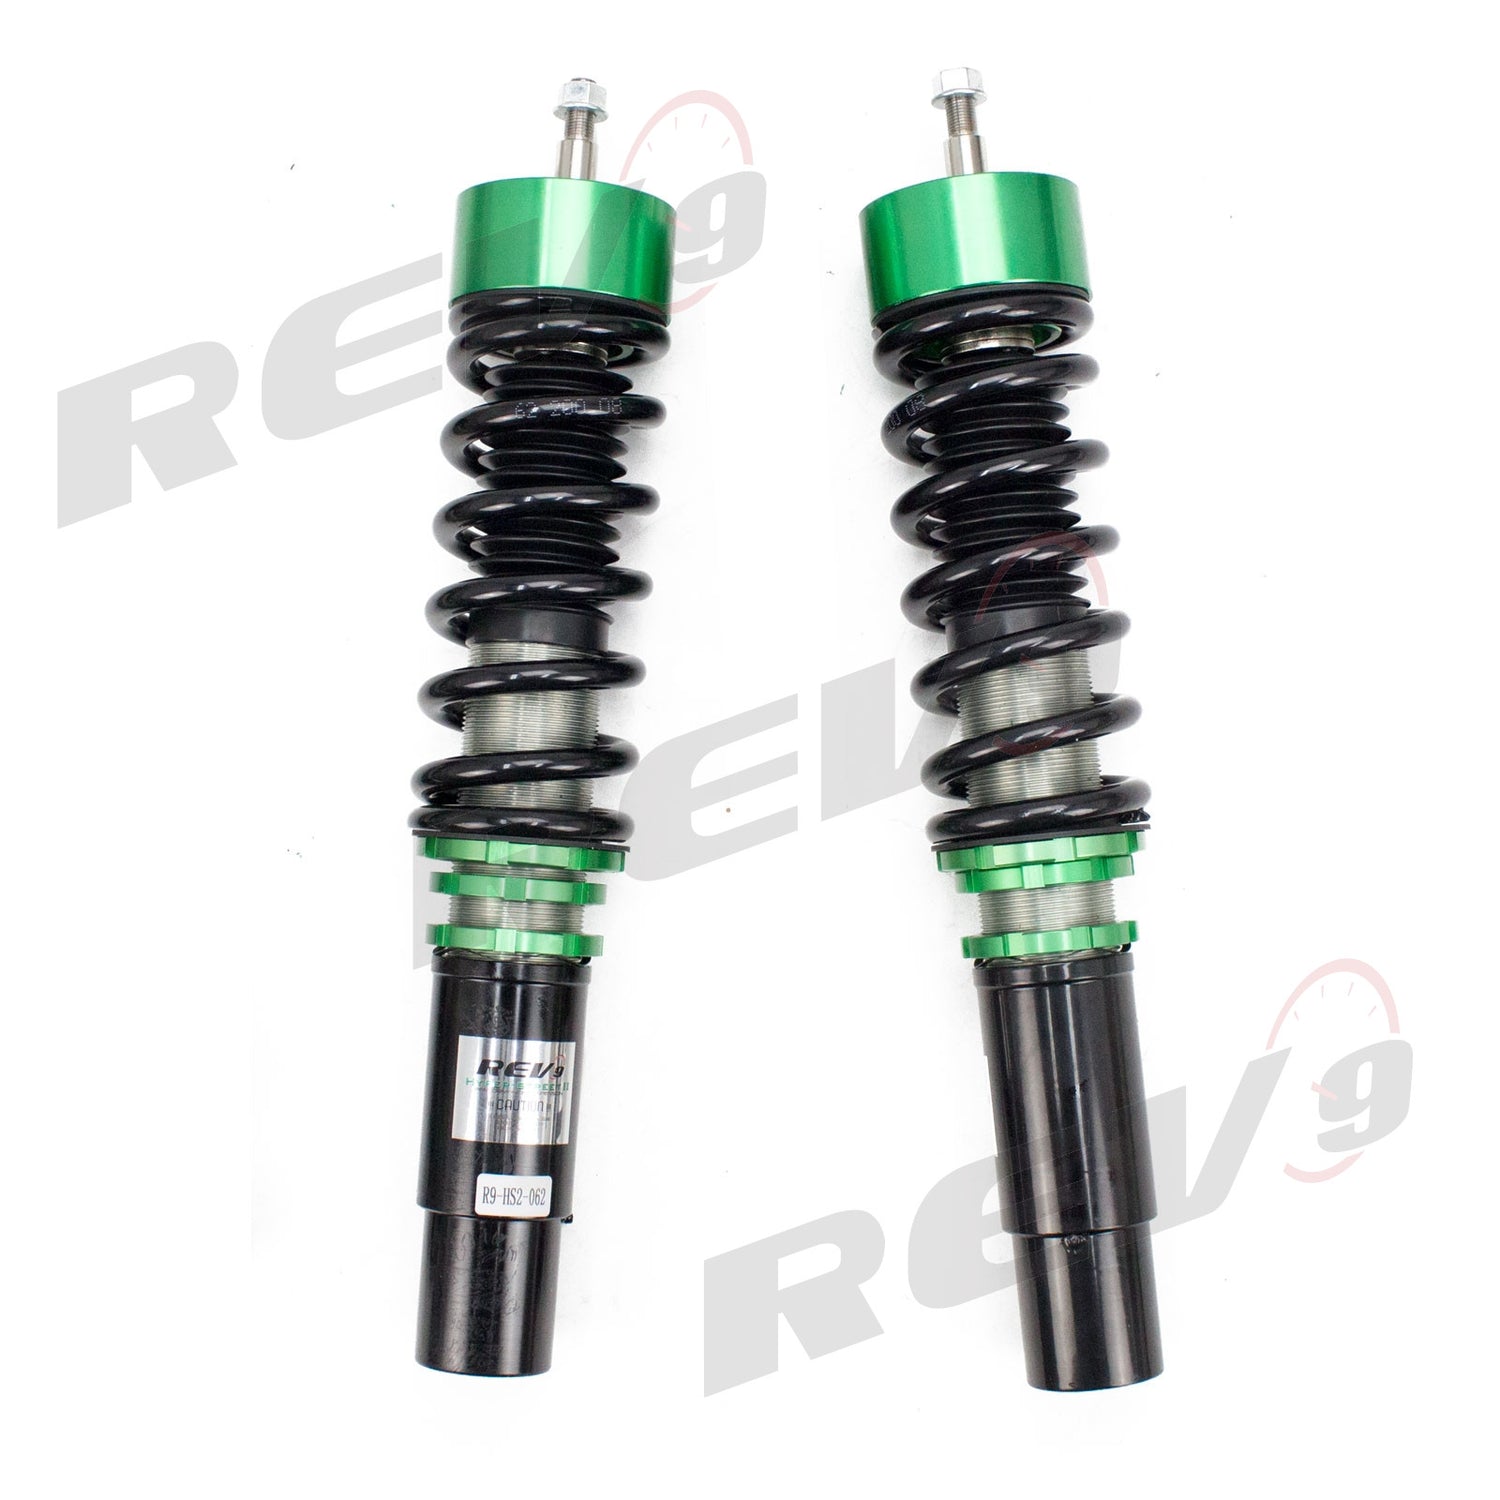 REV9 Comapatble With Audi S4 (8K) 2010-16 Hyper-Street II Coilover Kit w/ 32-Way Damping Force Adjustment